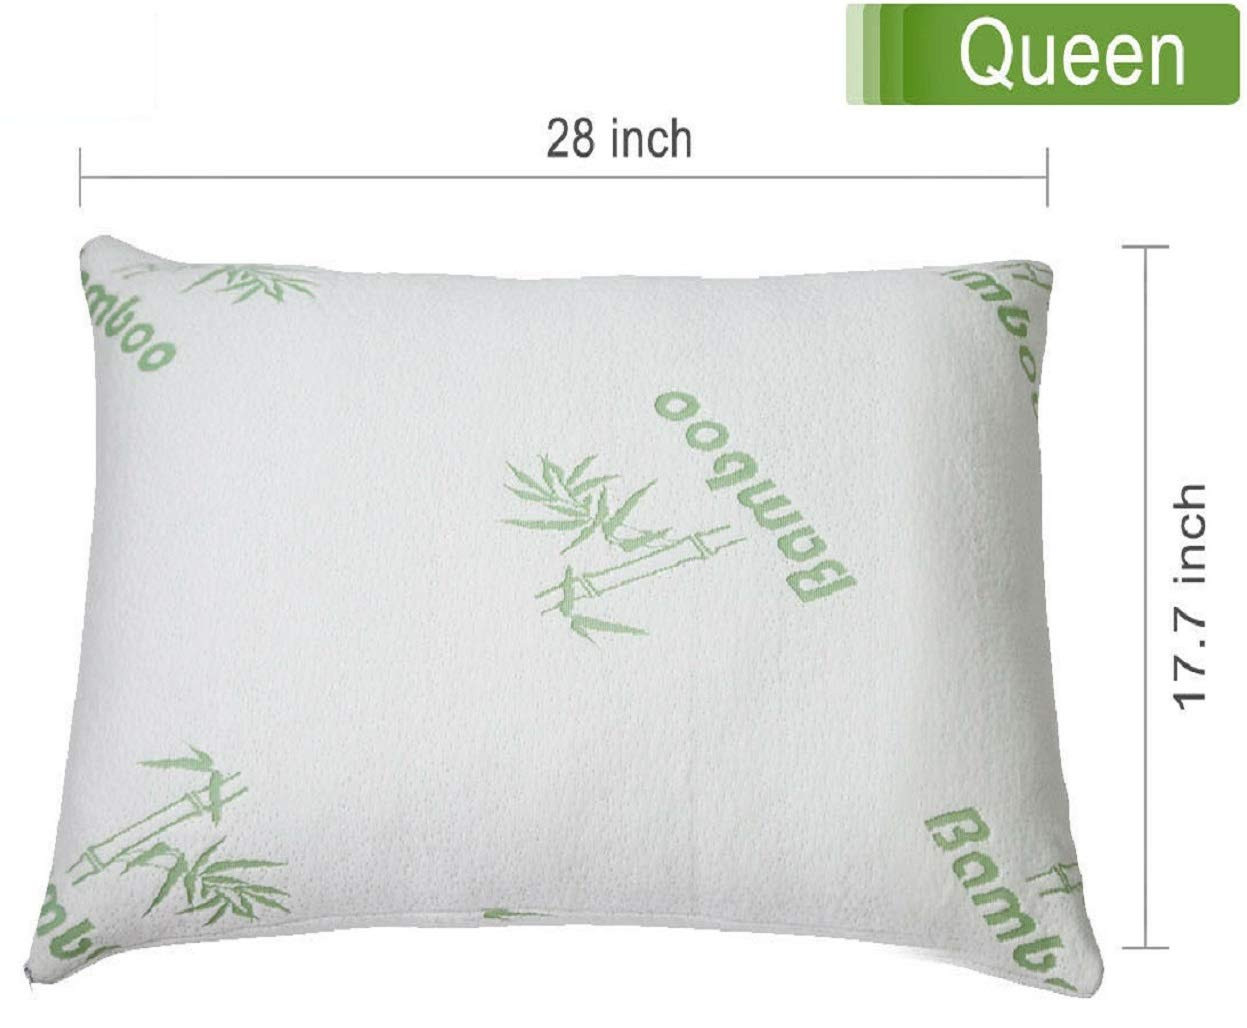 Cool Bamboo Pillow Adjustable Inner Back Stomach Side Sleeper Queen Size 